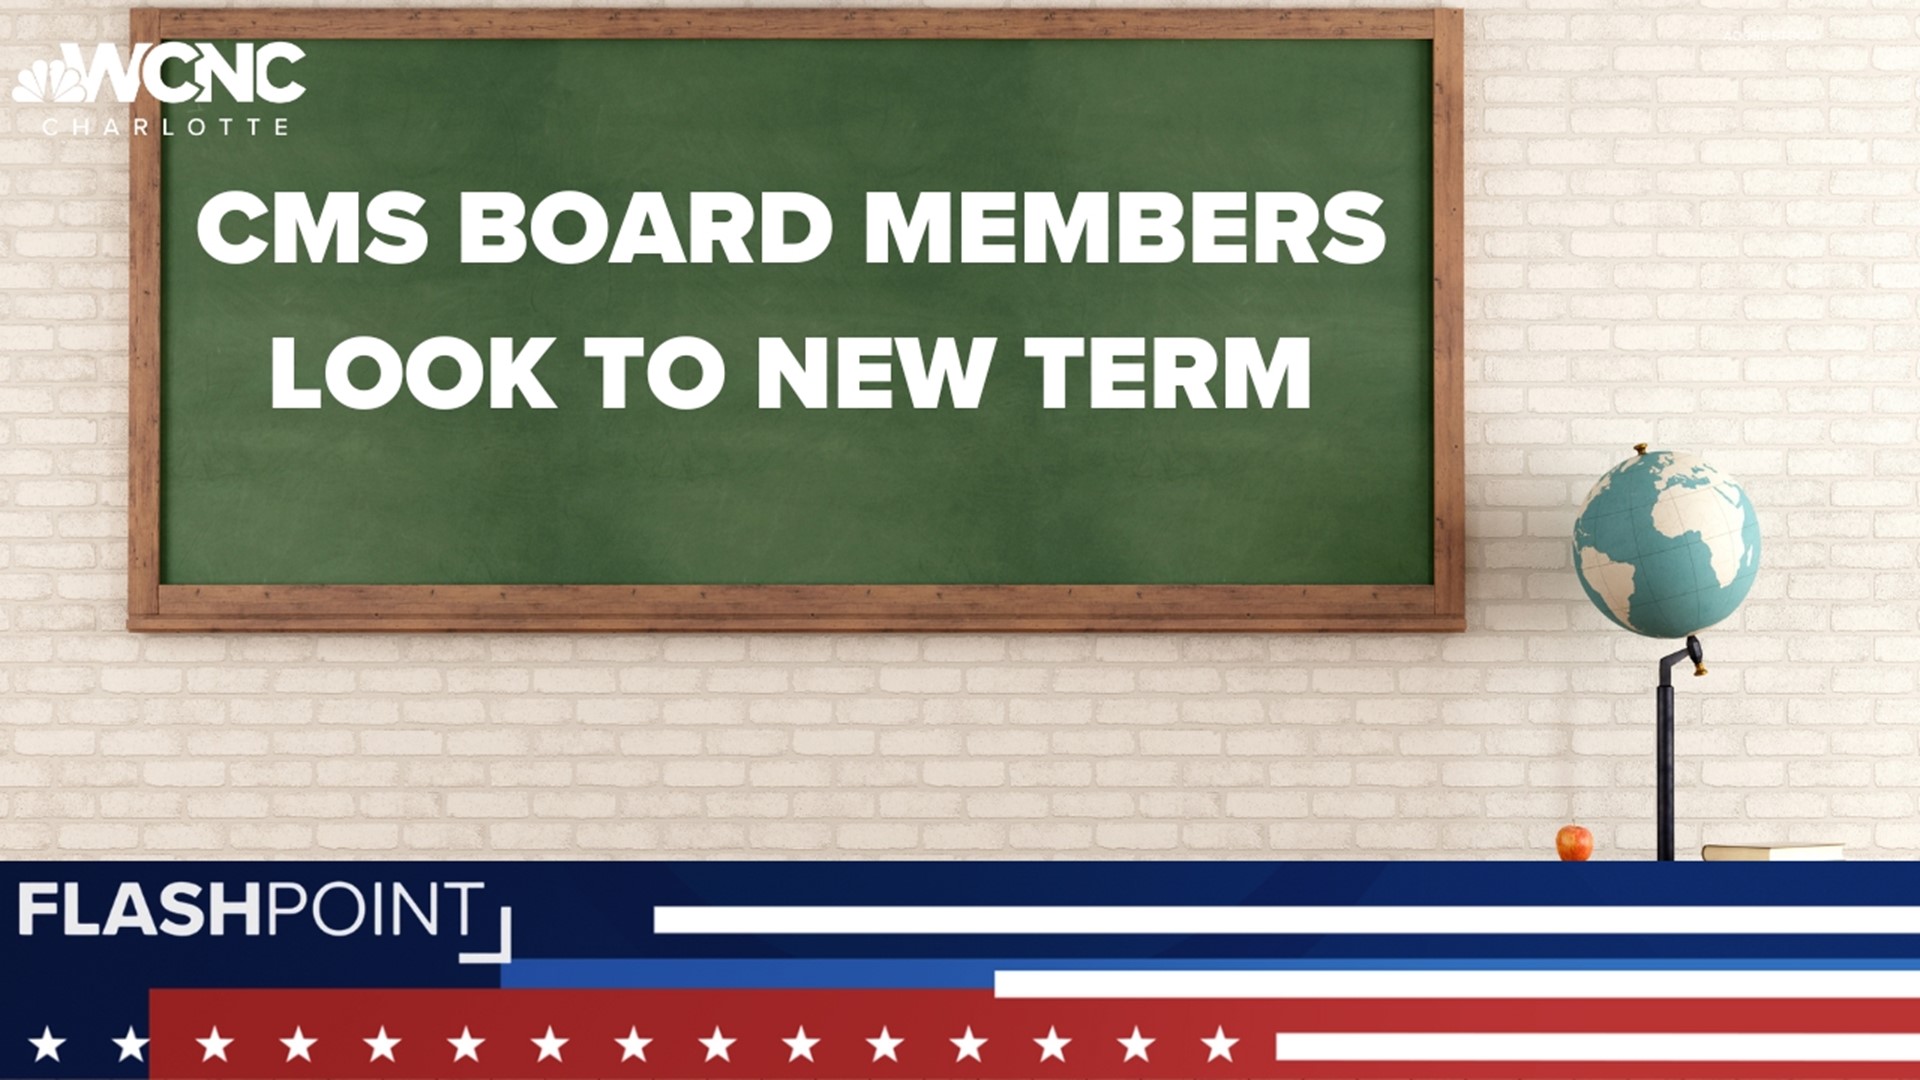 On Flashpoint, new board members say superintendent selection will be board's top priority.